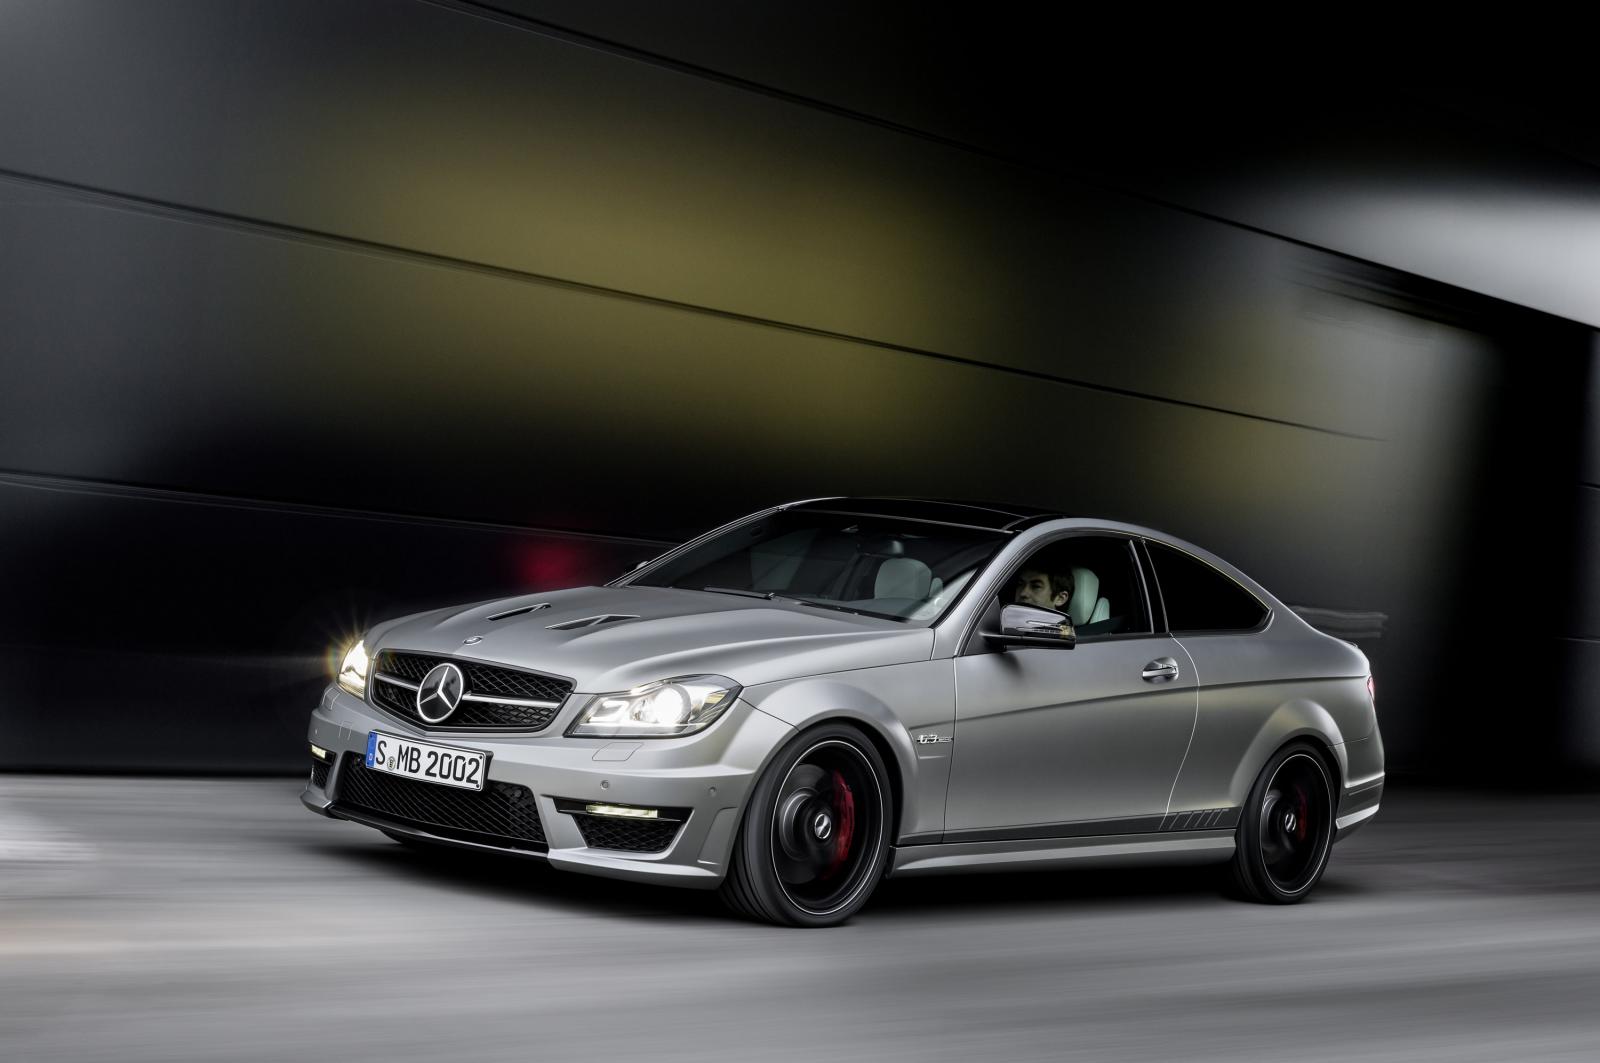 2014 Mercedes Benz C63 Amg Edition 507 Released Video